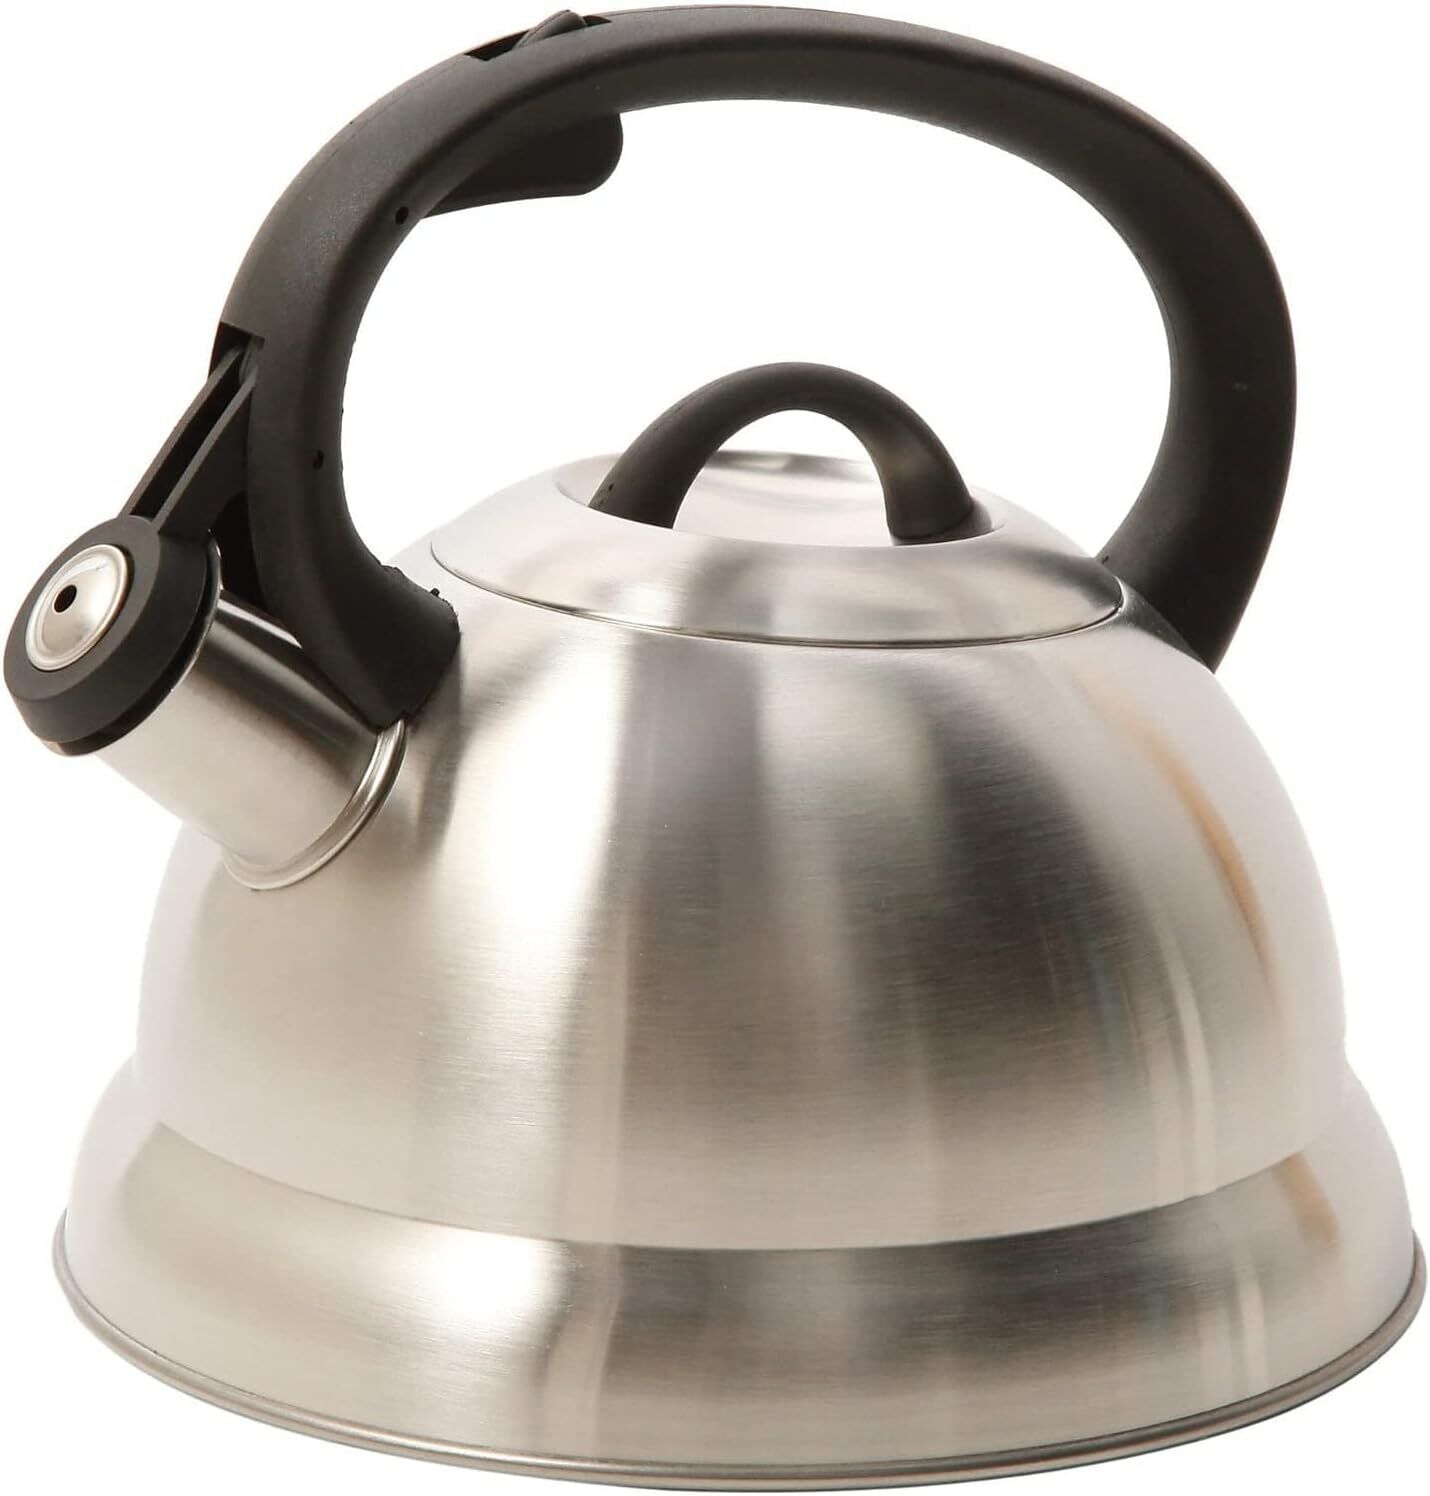 Flintshire Stainless Steel Whistling Tea Kettle,New free freight